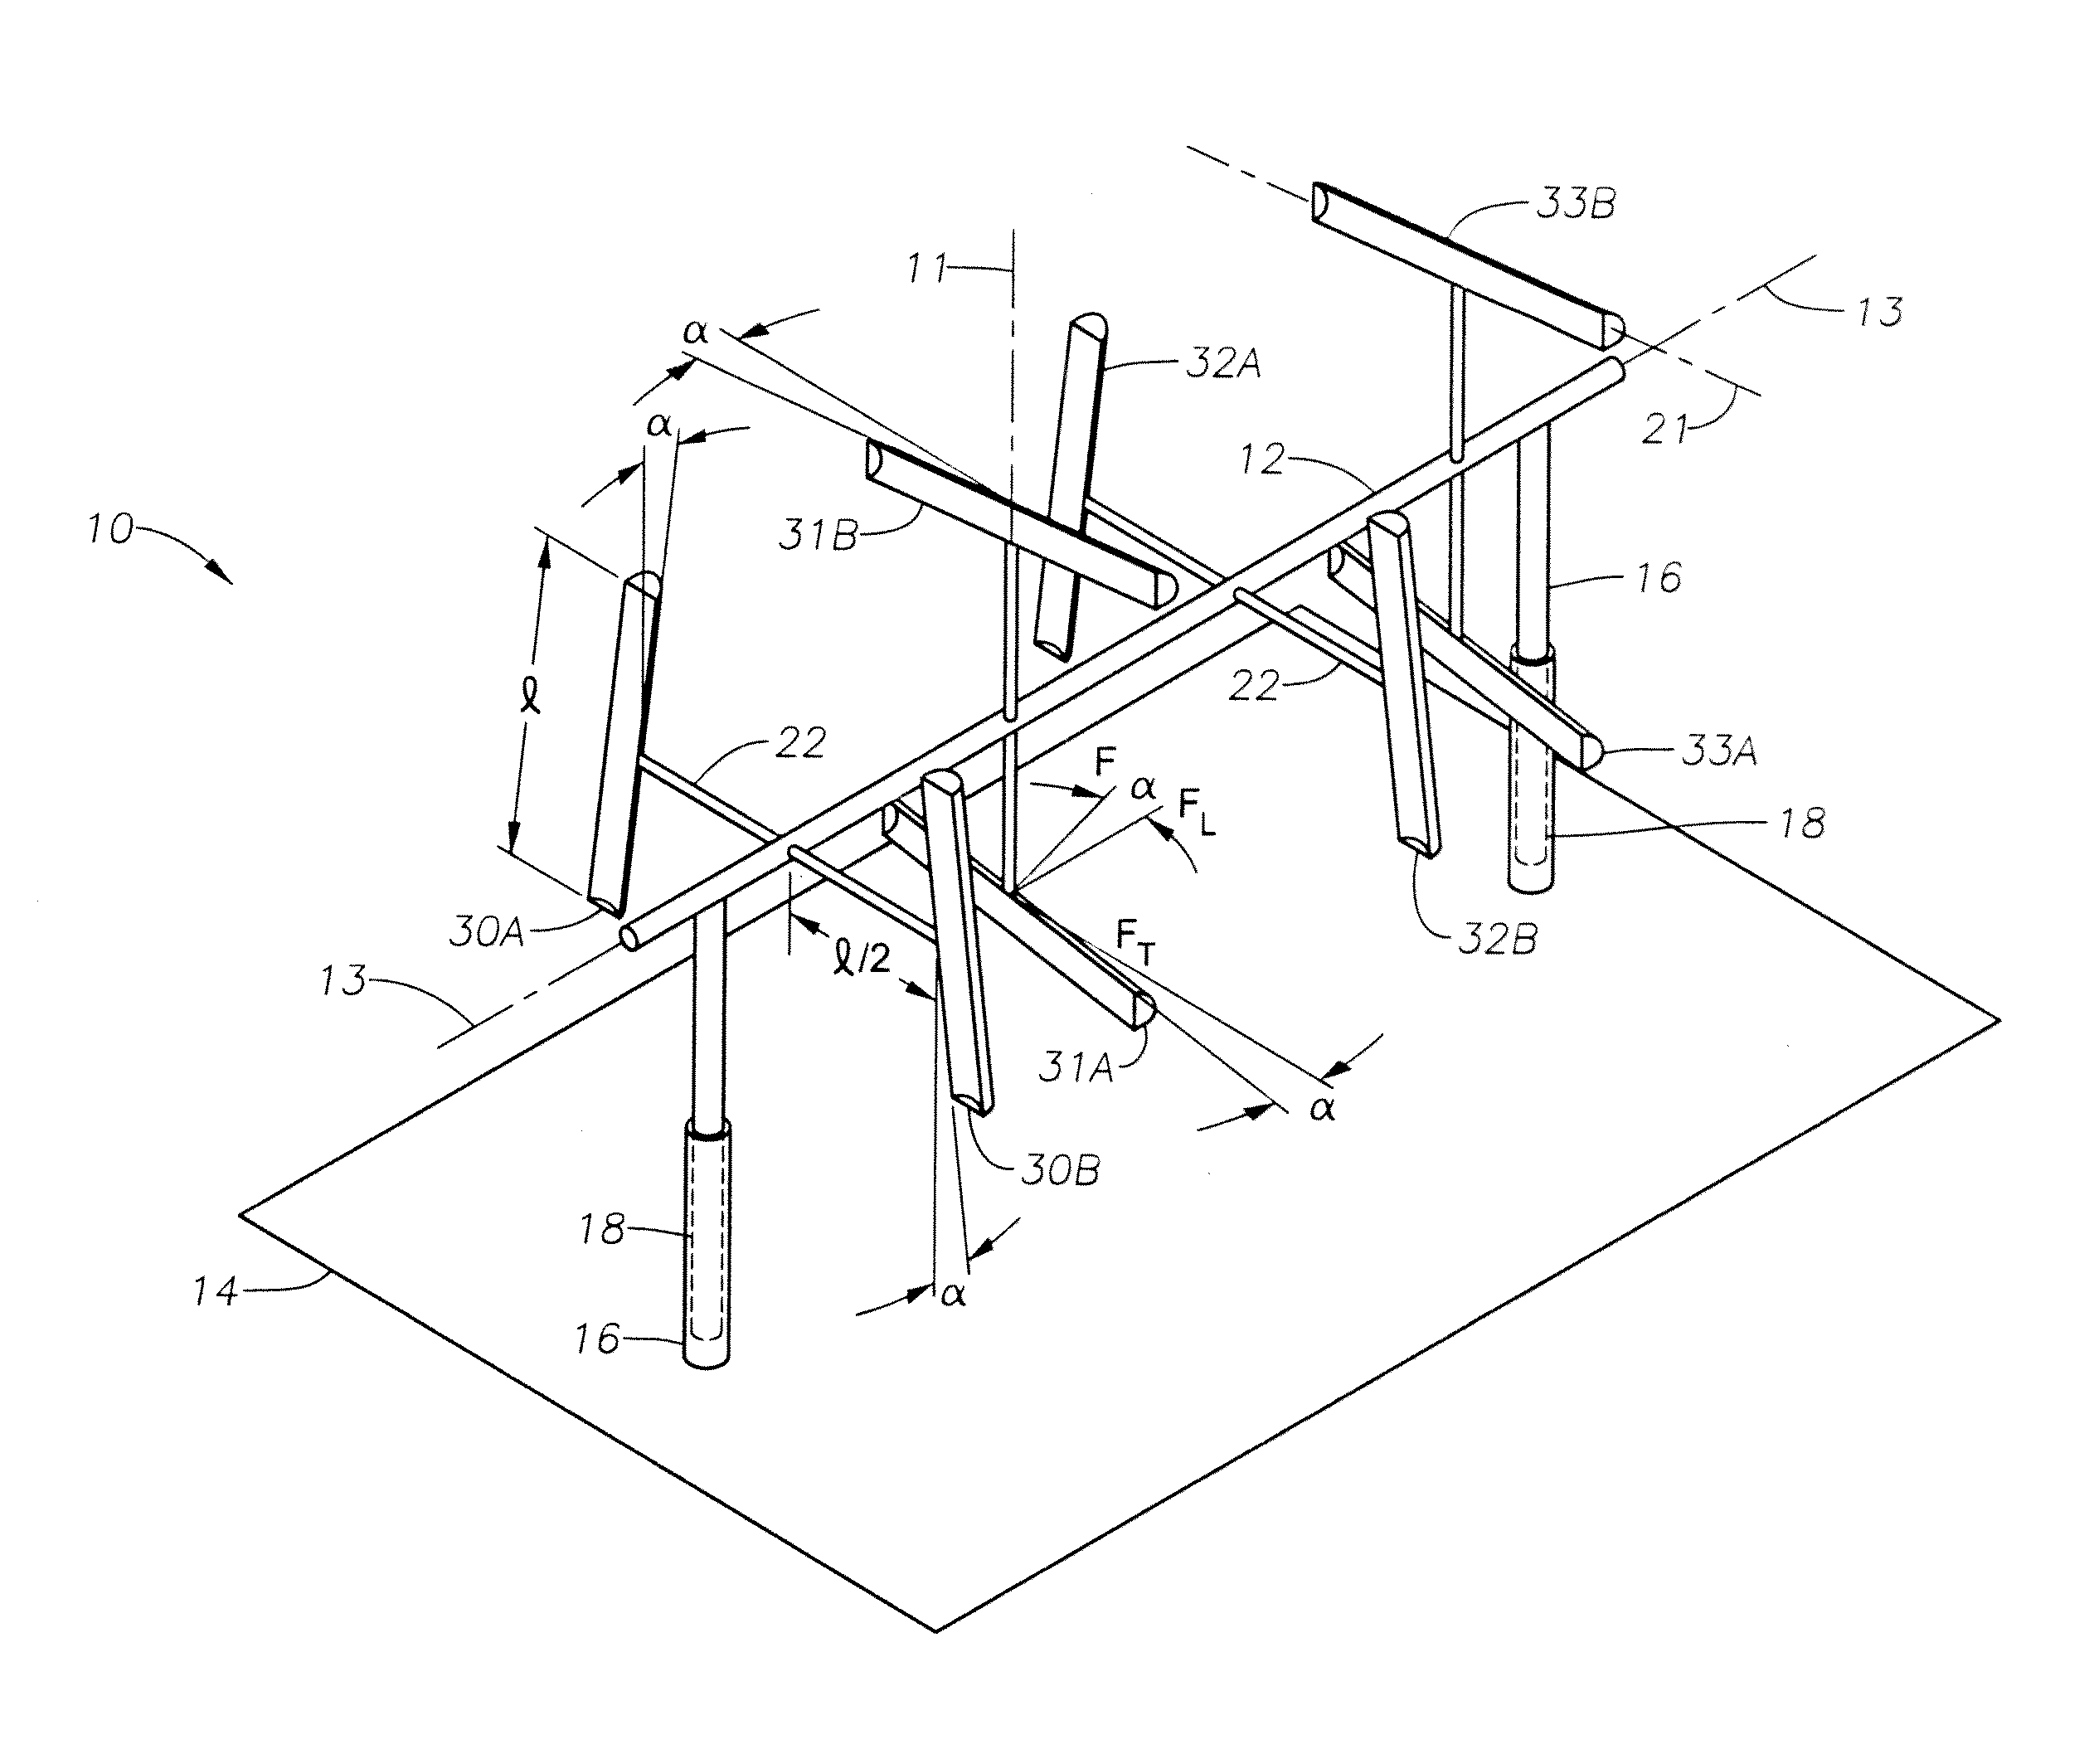 Turbine system and method for extracting energy from waves, wind, and other fluid flows